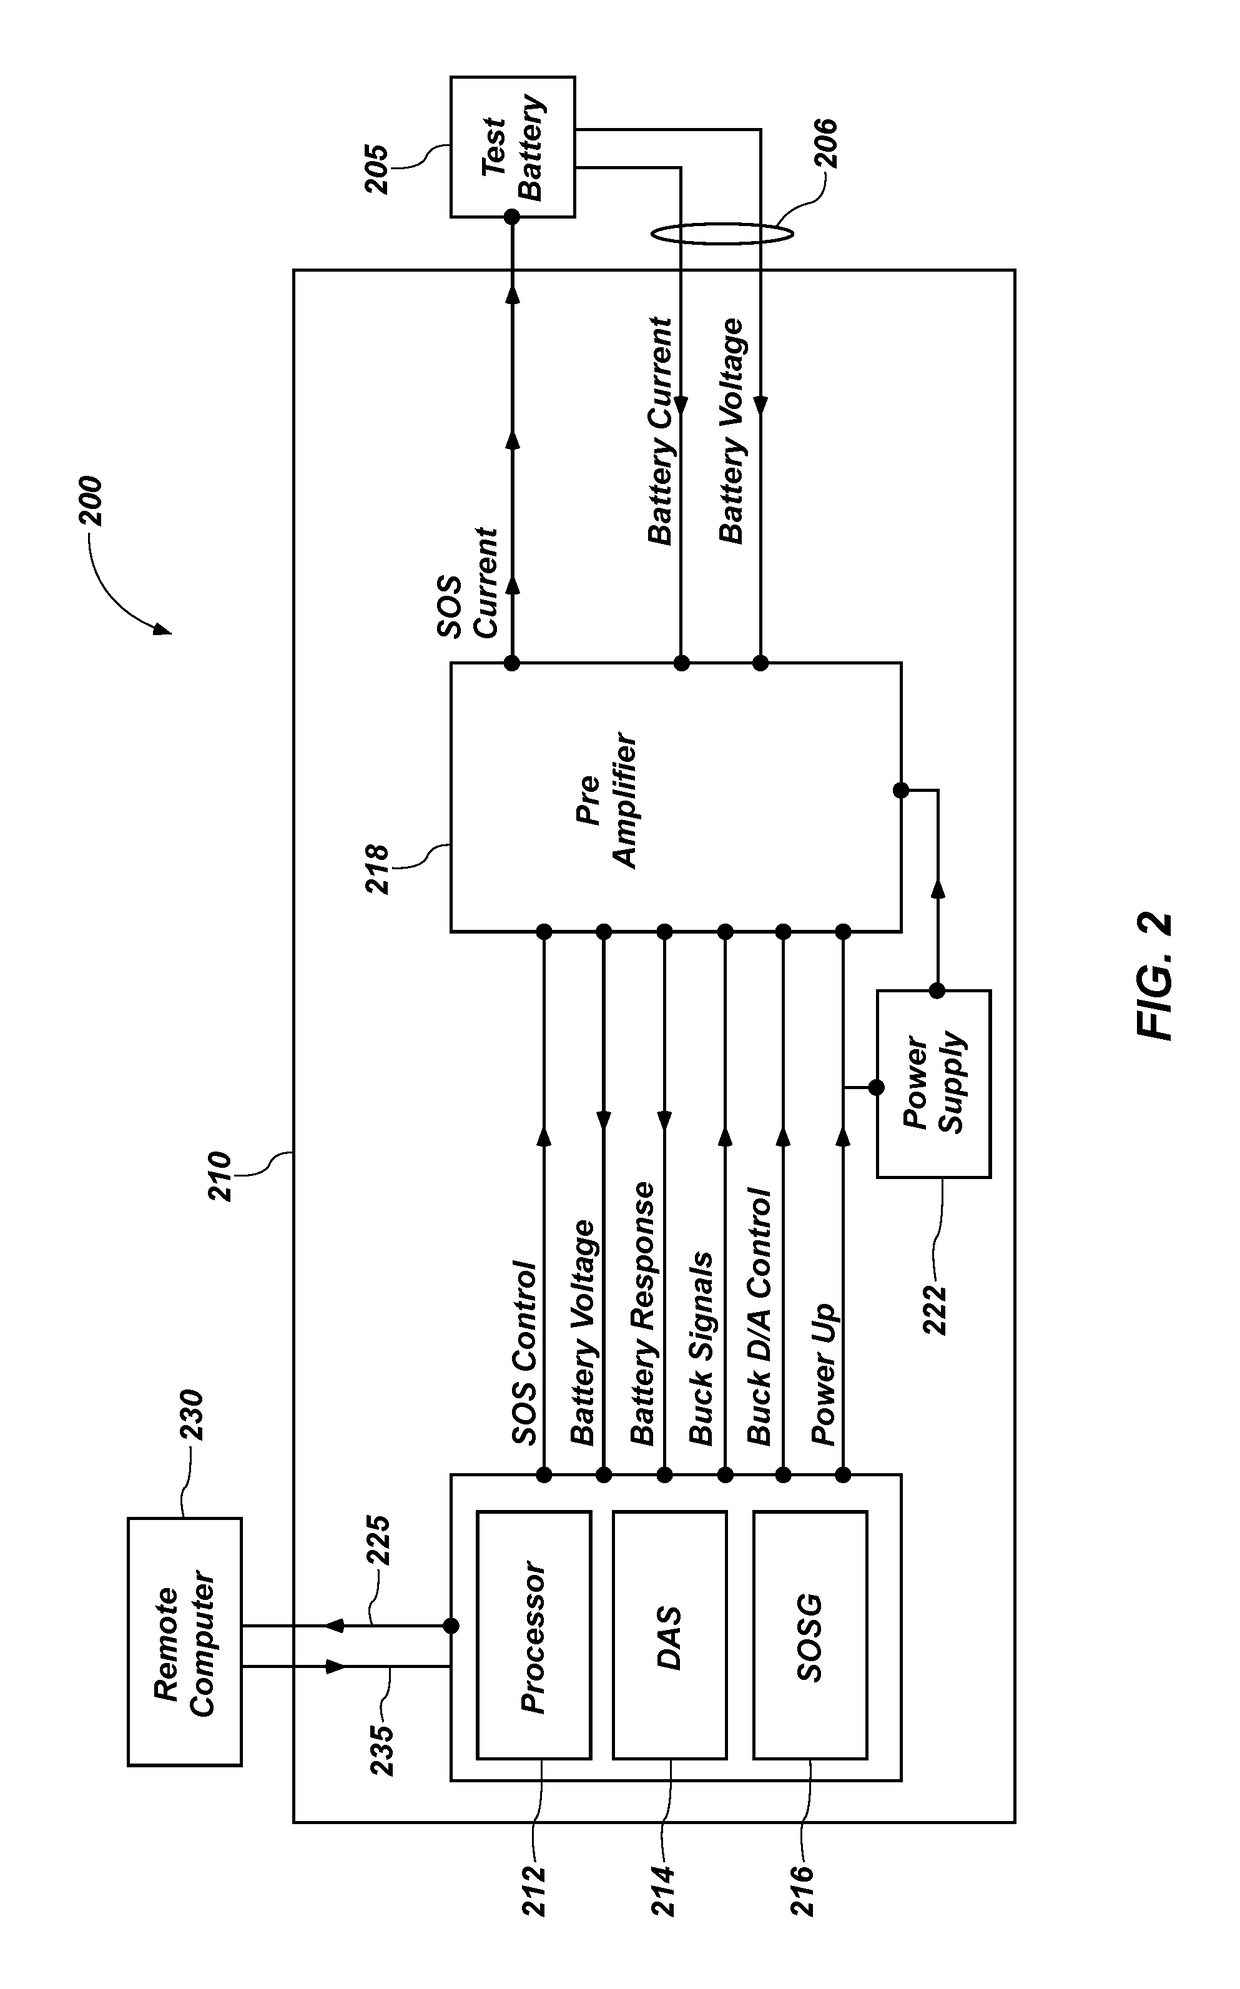 Device, system, and method for measuring internal impedance of a test battery using frequency response